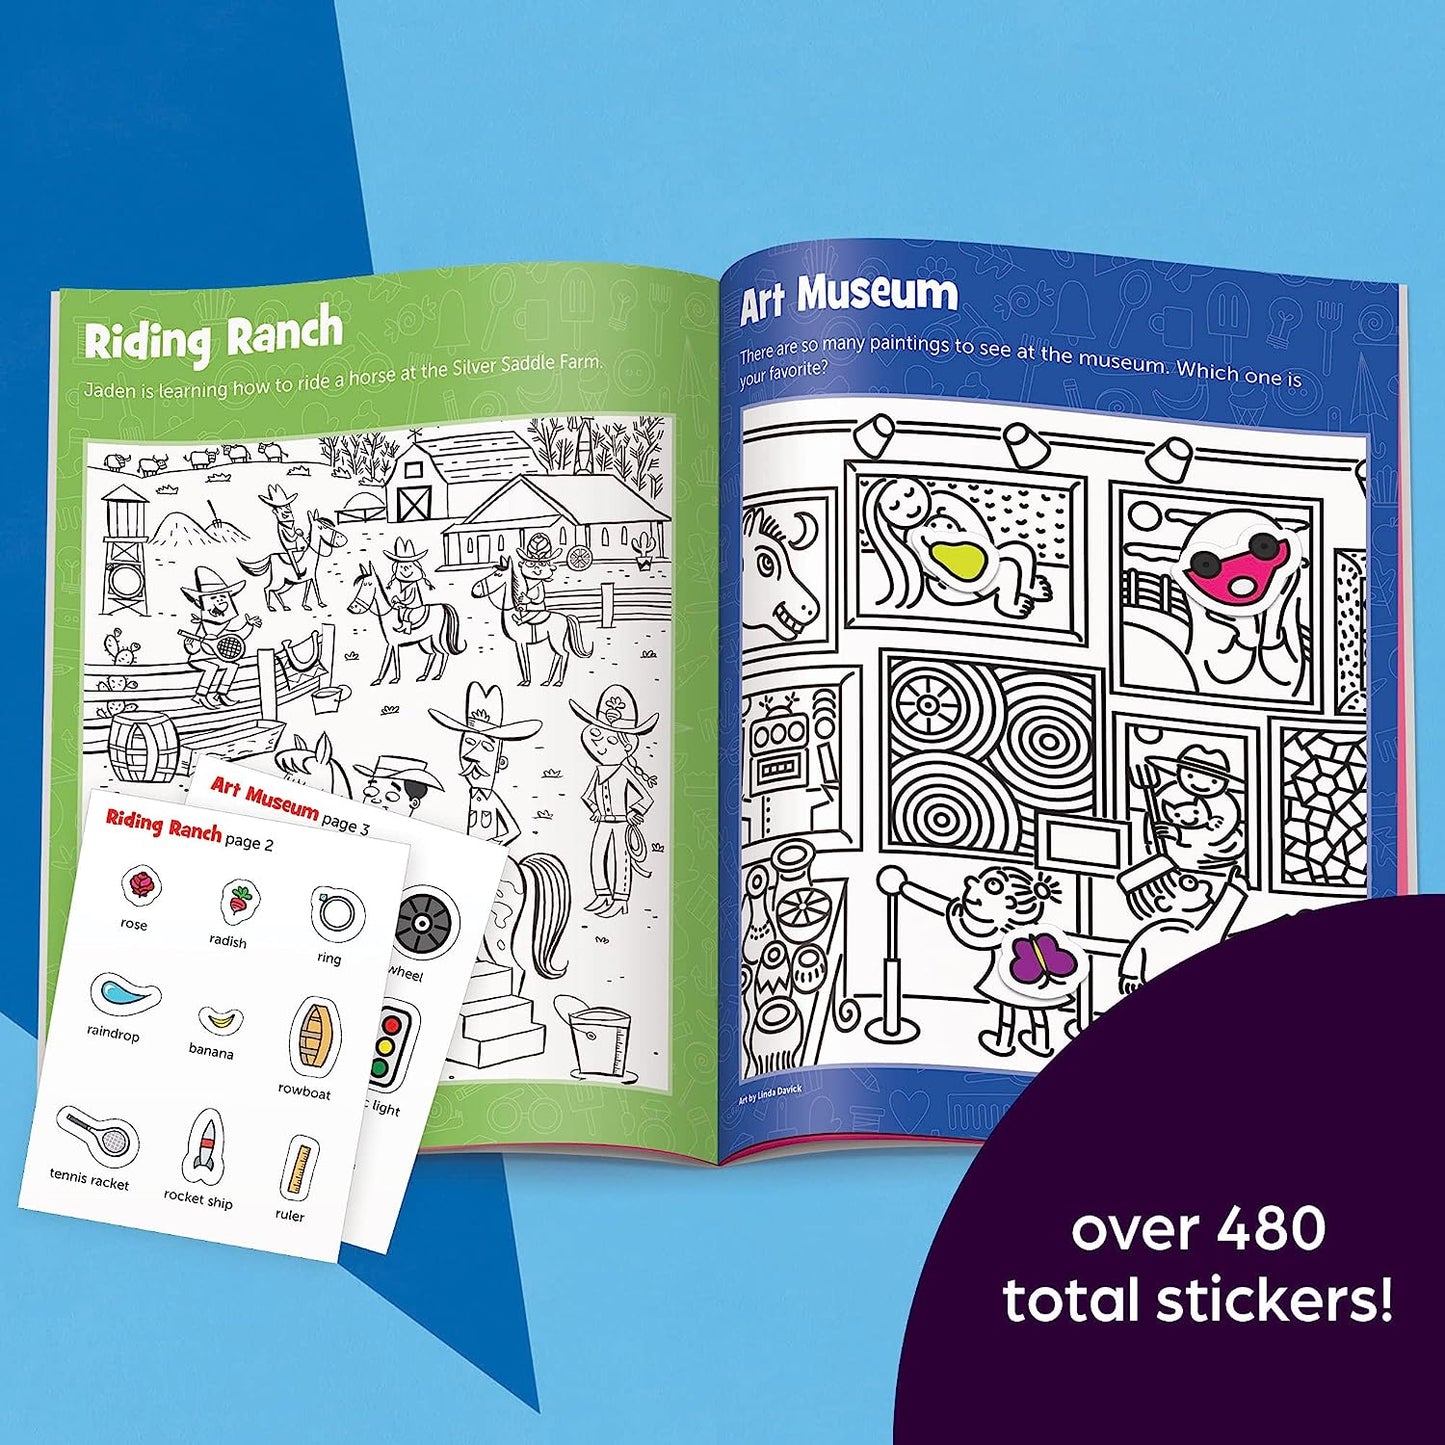 Highlights Hidden Pictures Sticker Fun Sticker Books for Kids Ages 3-6, 4-Pack, 64 Pages - Volume 2